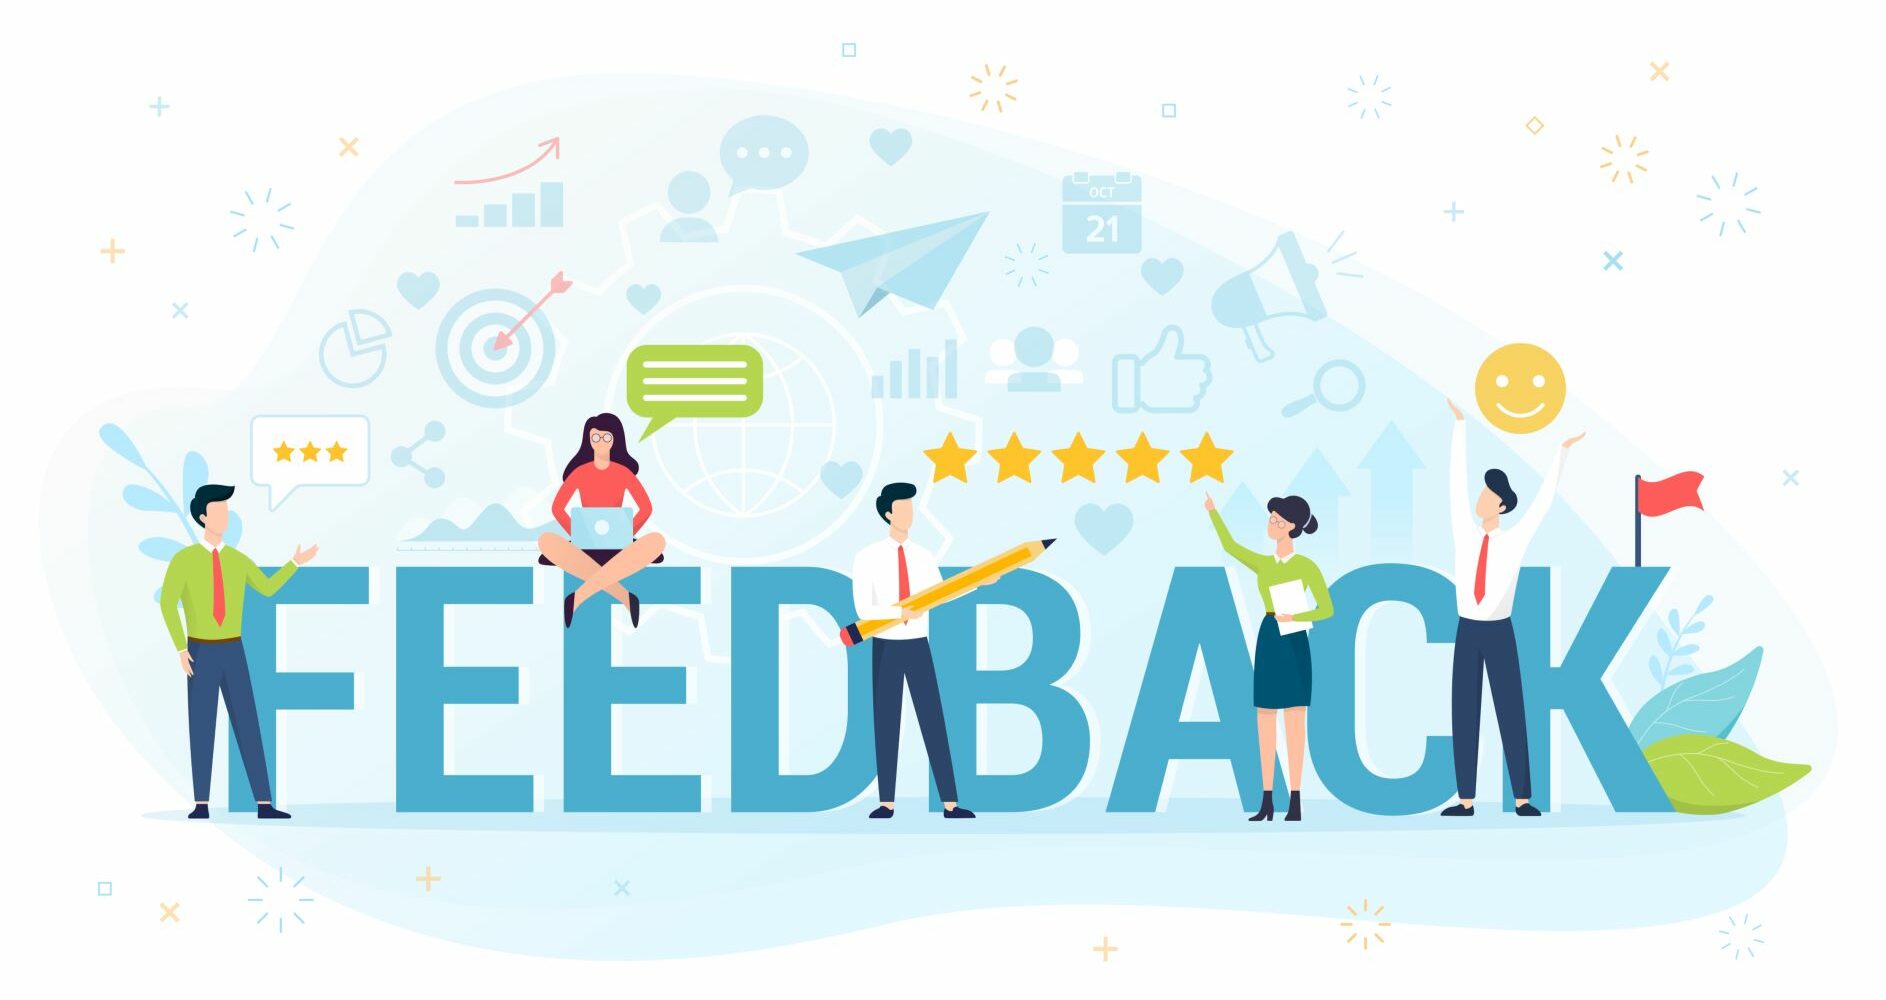 5 Tips on How to Ace Your Feedback Presentation